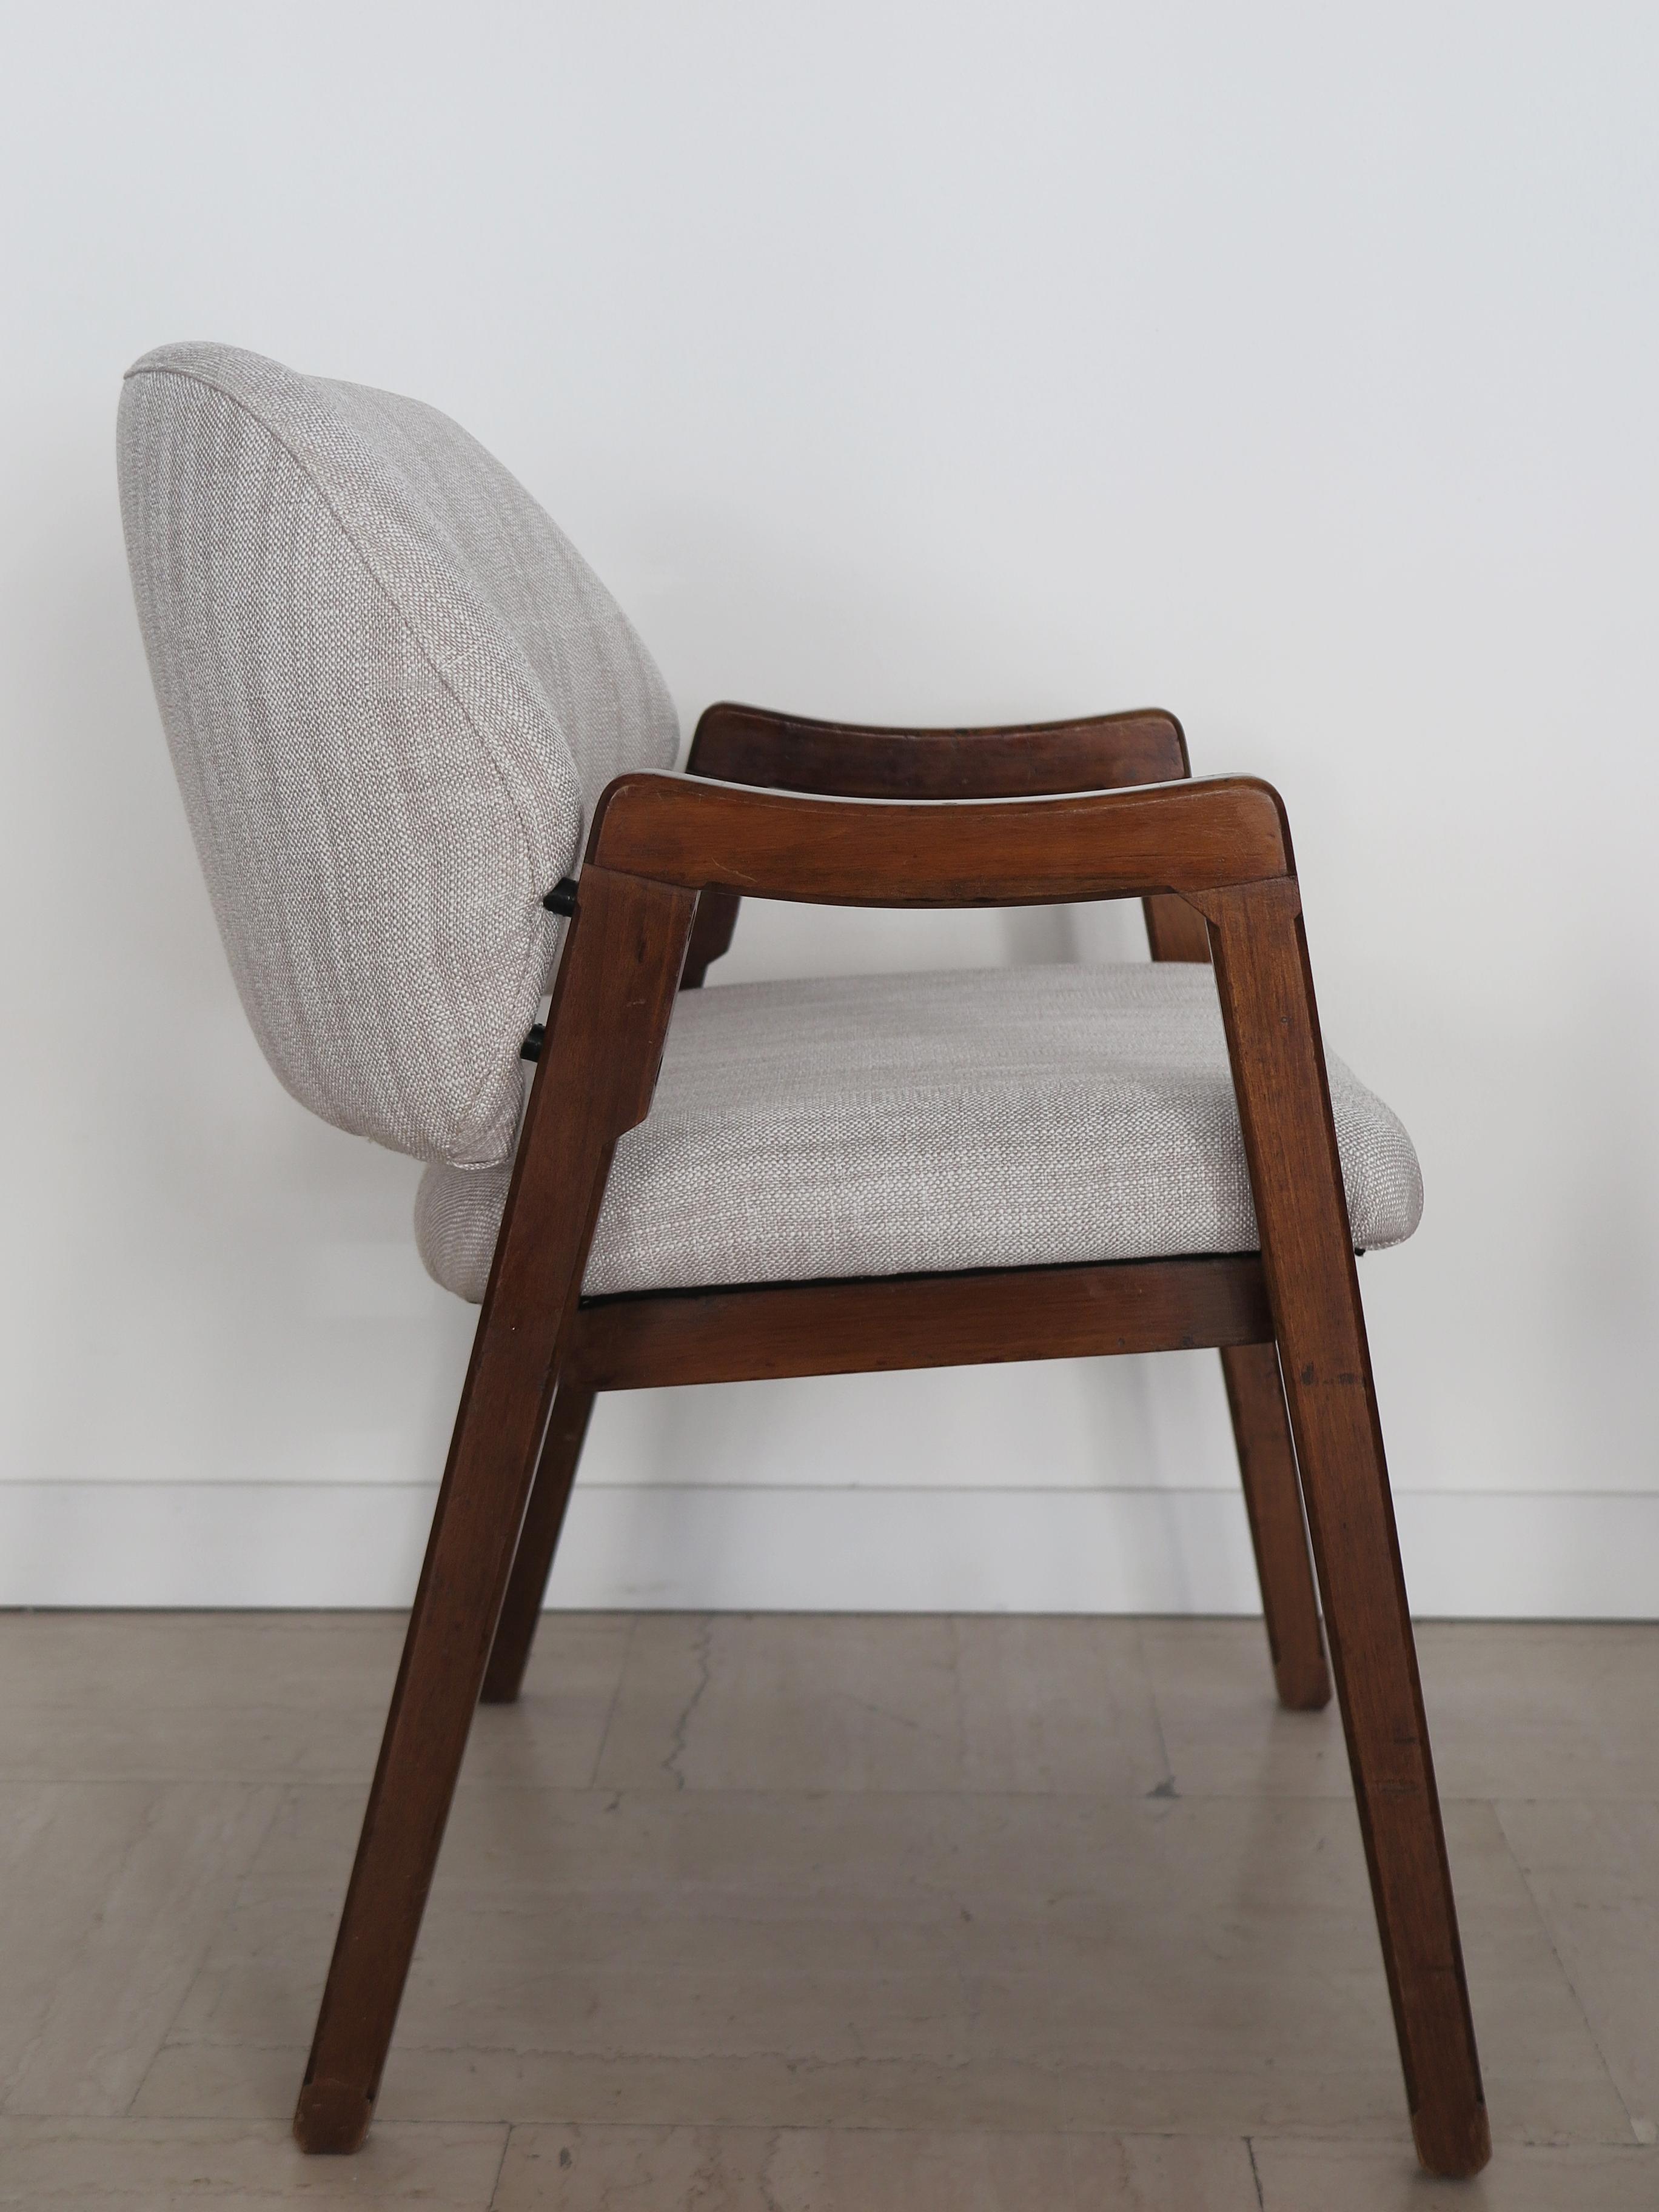 Mid-20th Century Ico Parisi Italian Midcentury Fabric Wood Armchair Model 814 for Cassina, 1960s For Sale